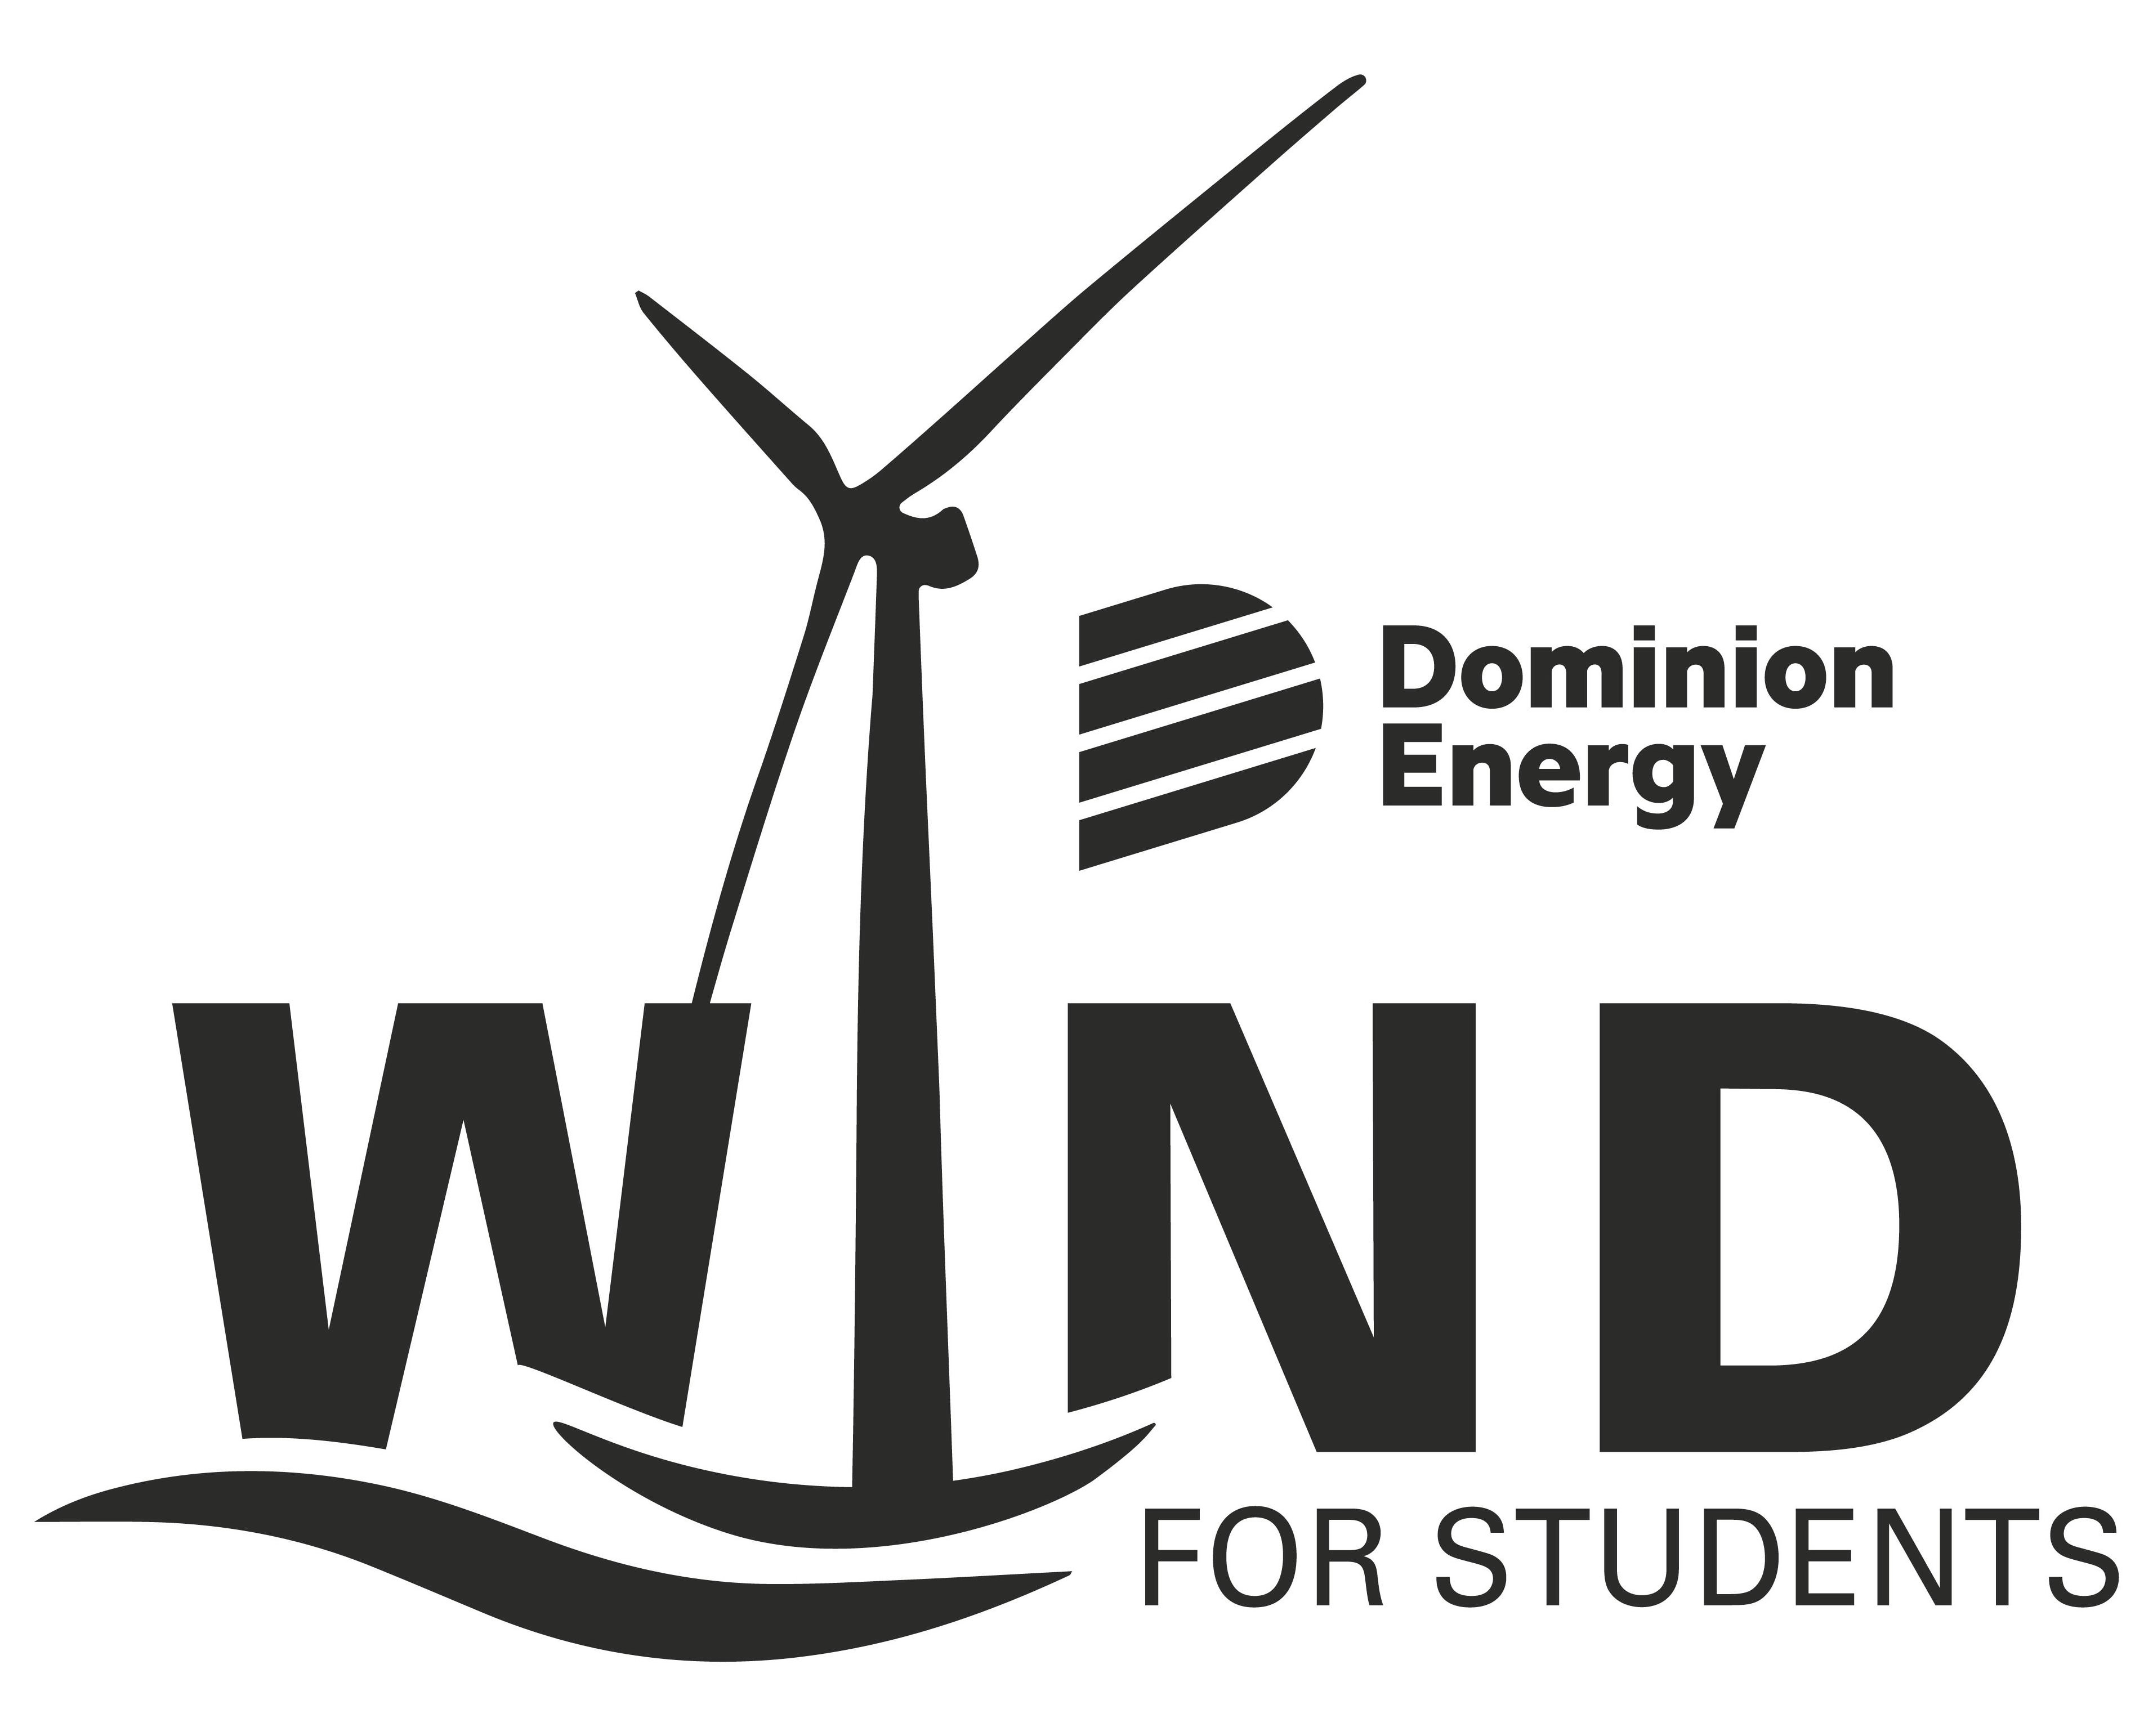  DOMINION ENERGY WIND FOR STUDENTS